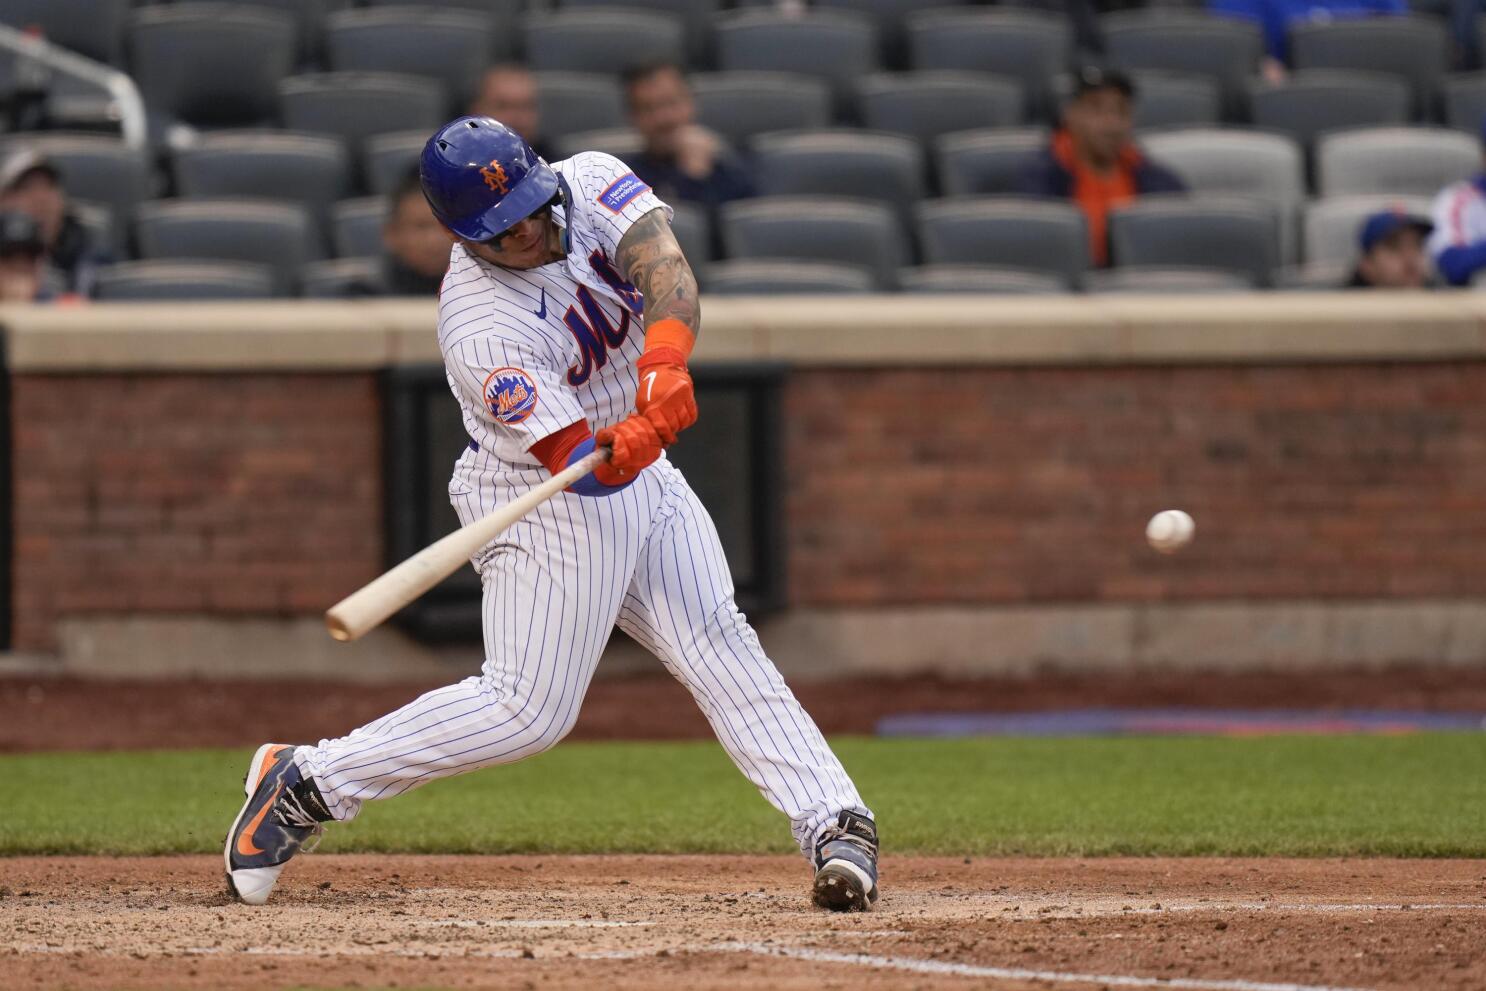 Mets' Reyes Hits, Then Sits, Then Celebrates Batting Title - The